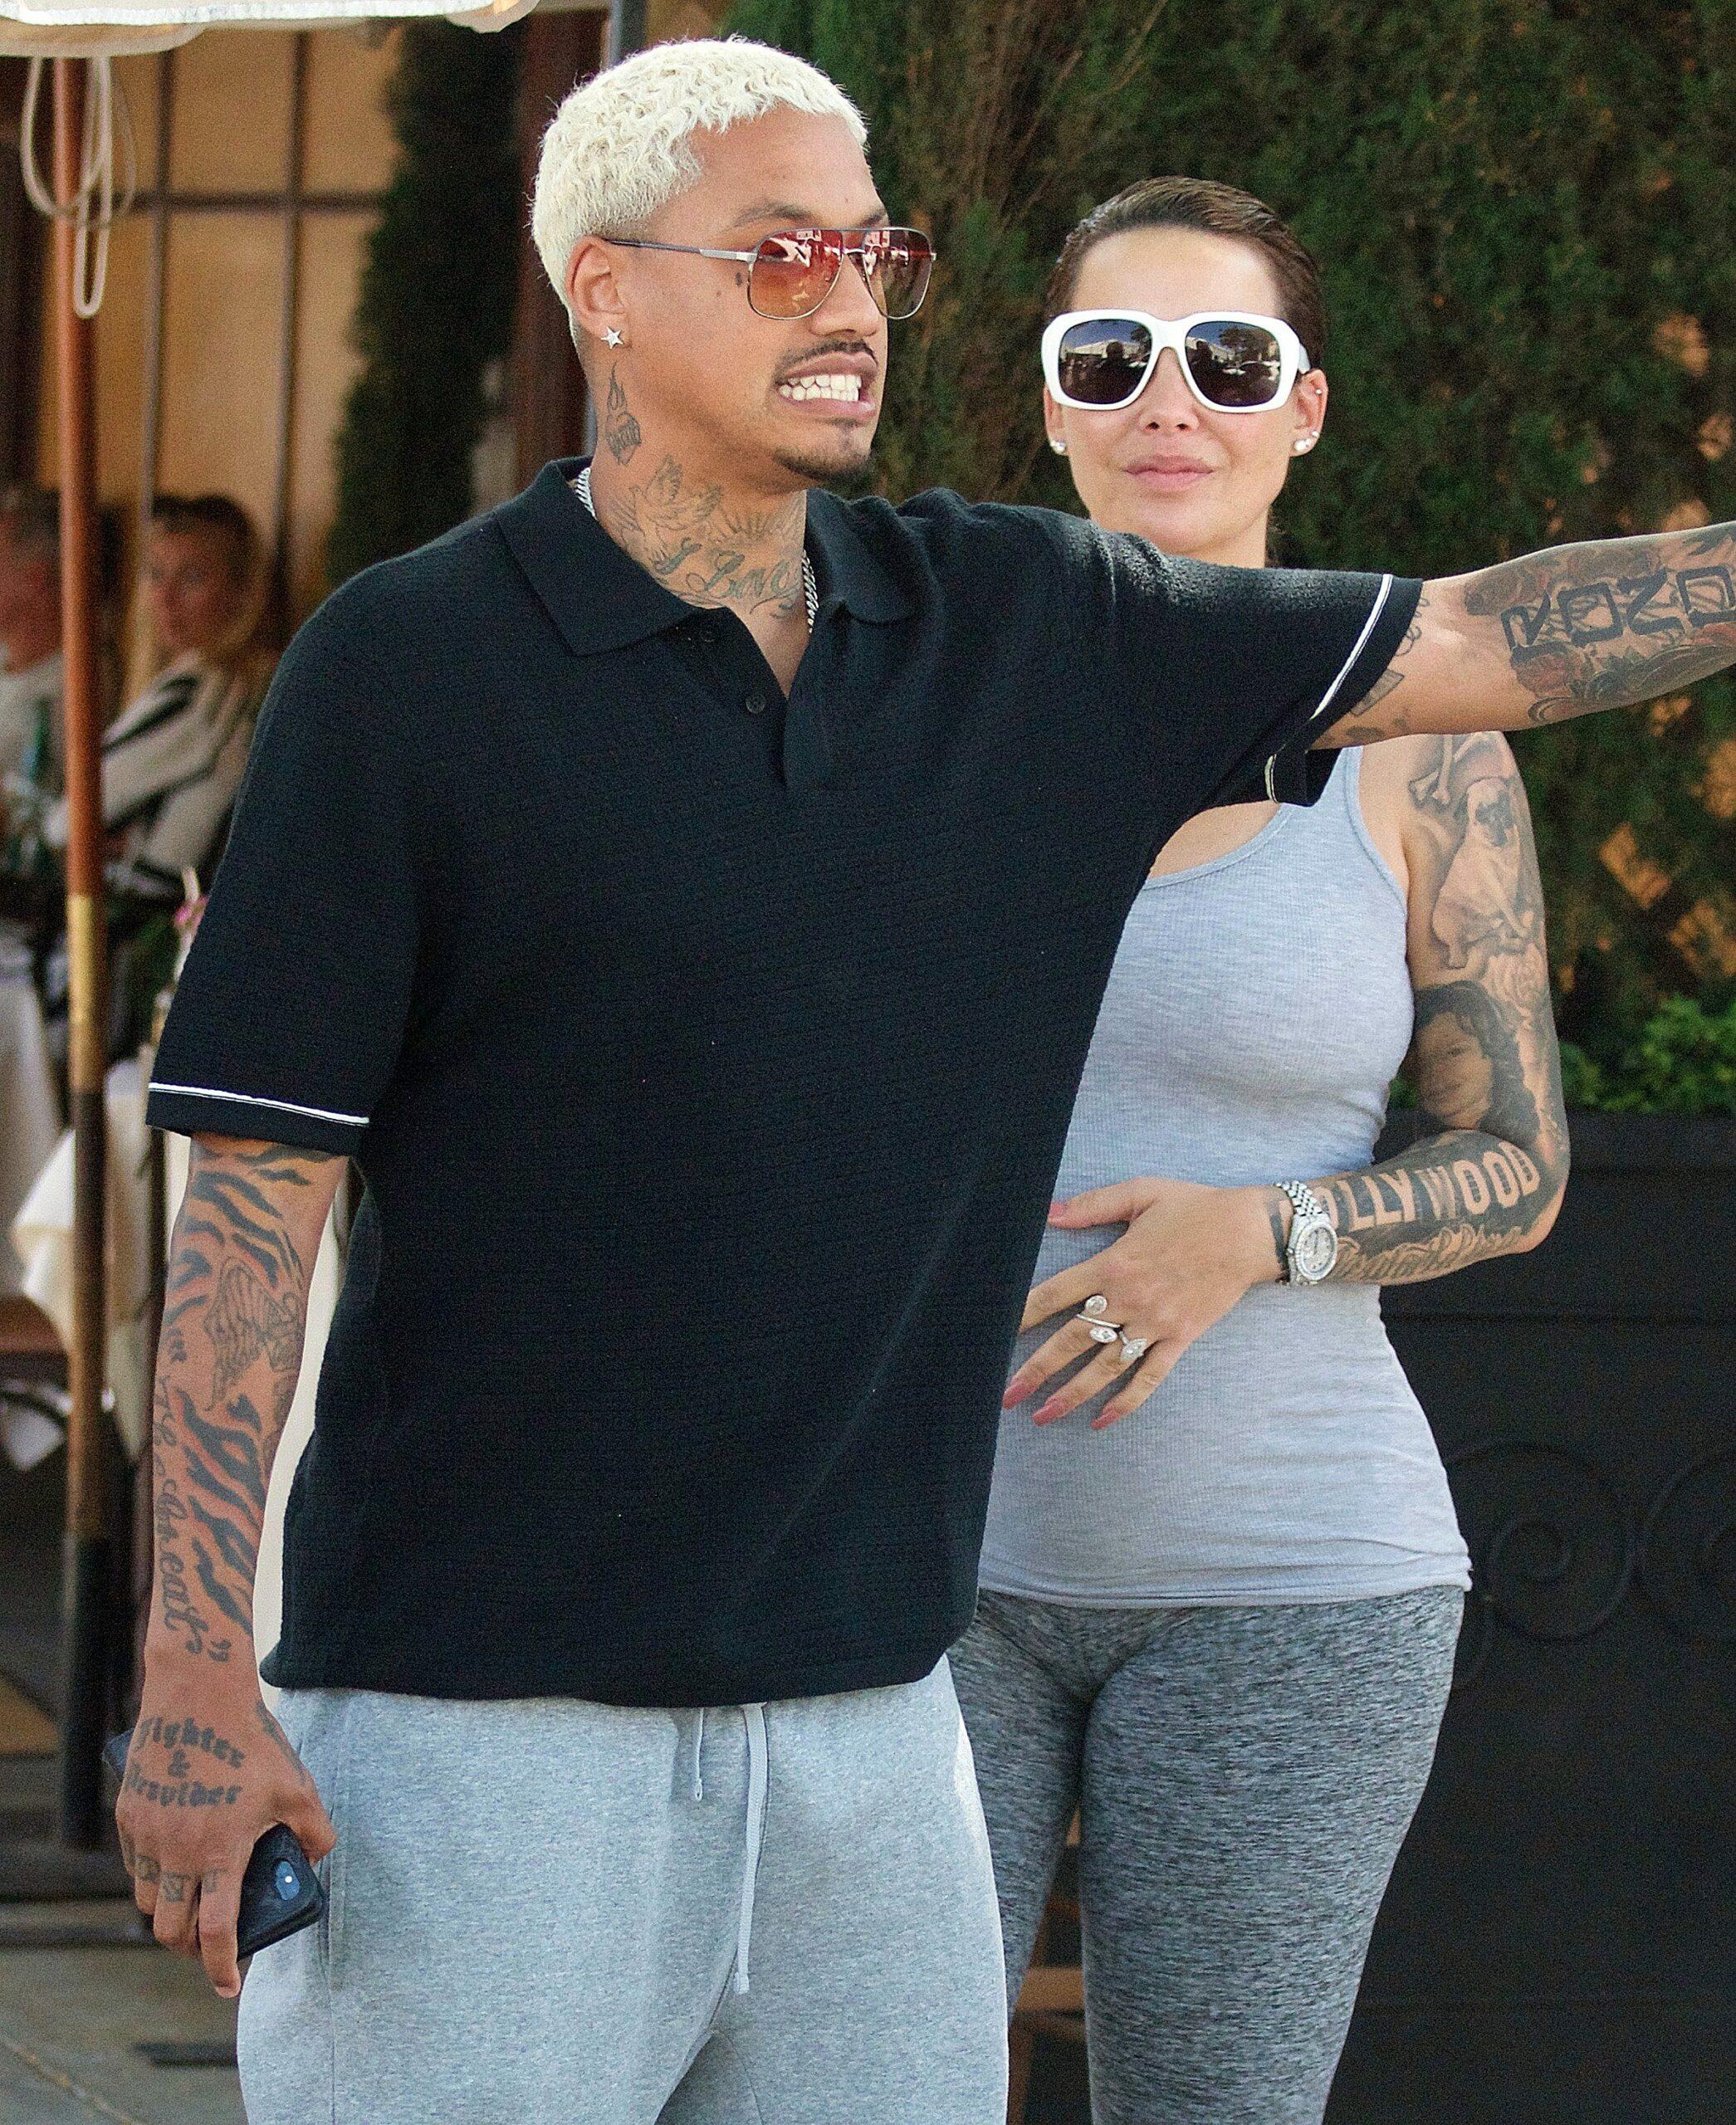 Amber Rose DUMPS Boyfriend On Instagram, Accuses Him Of Cheating With 12 Women!